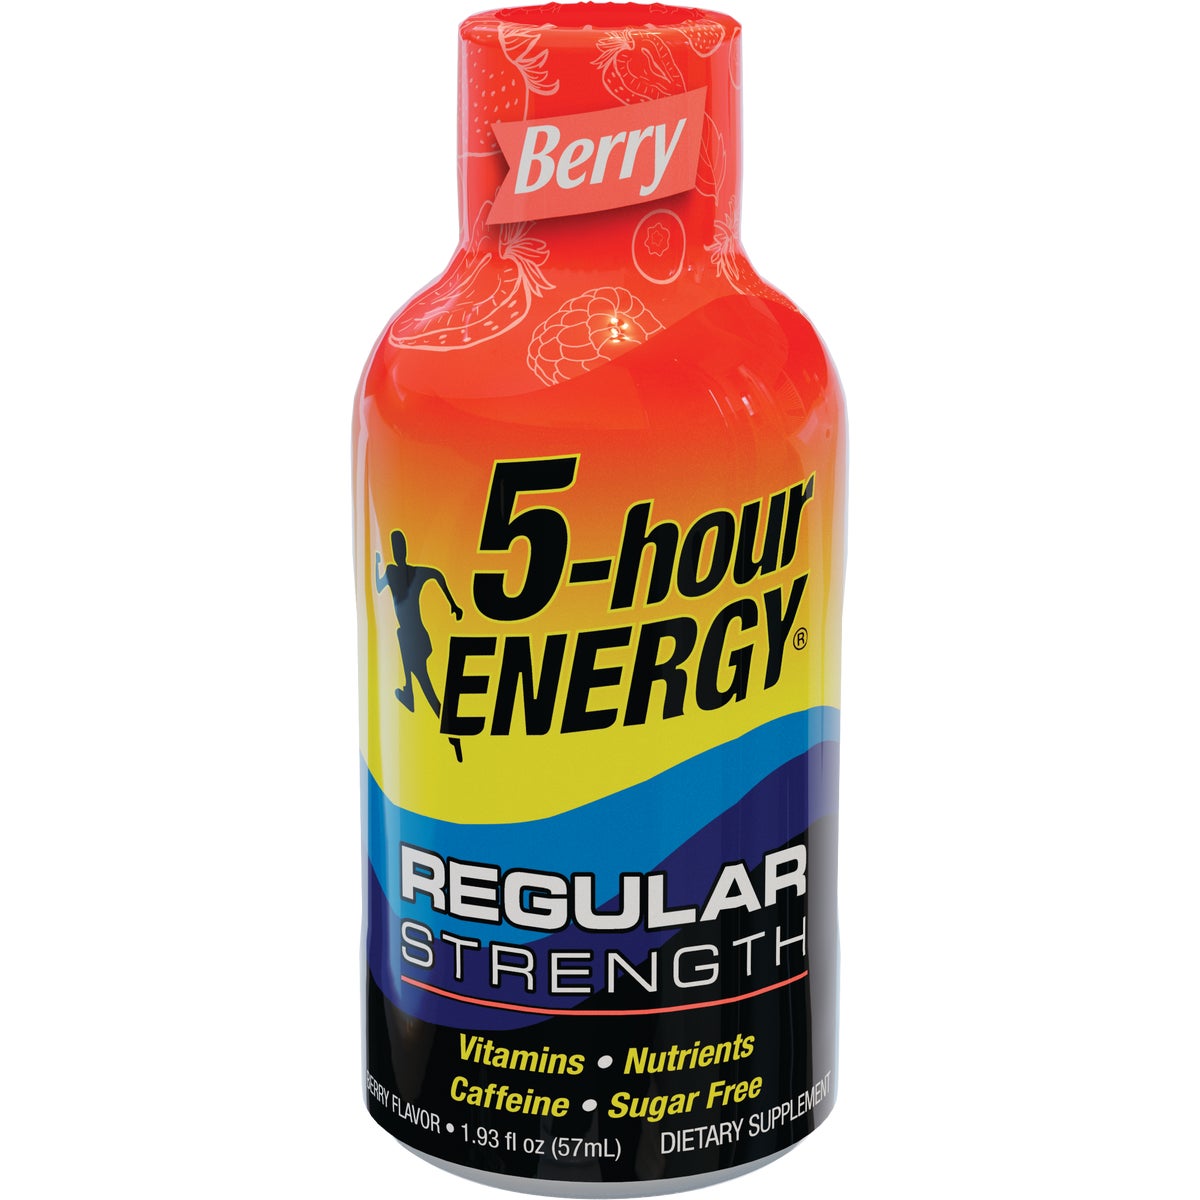 Item 973780, Need an extra boost to get through your day Grab a Berry Extra Strength 5-